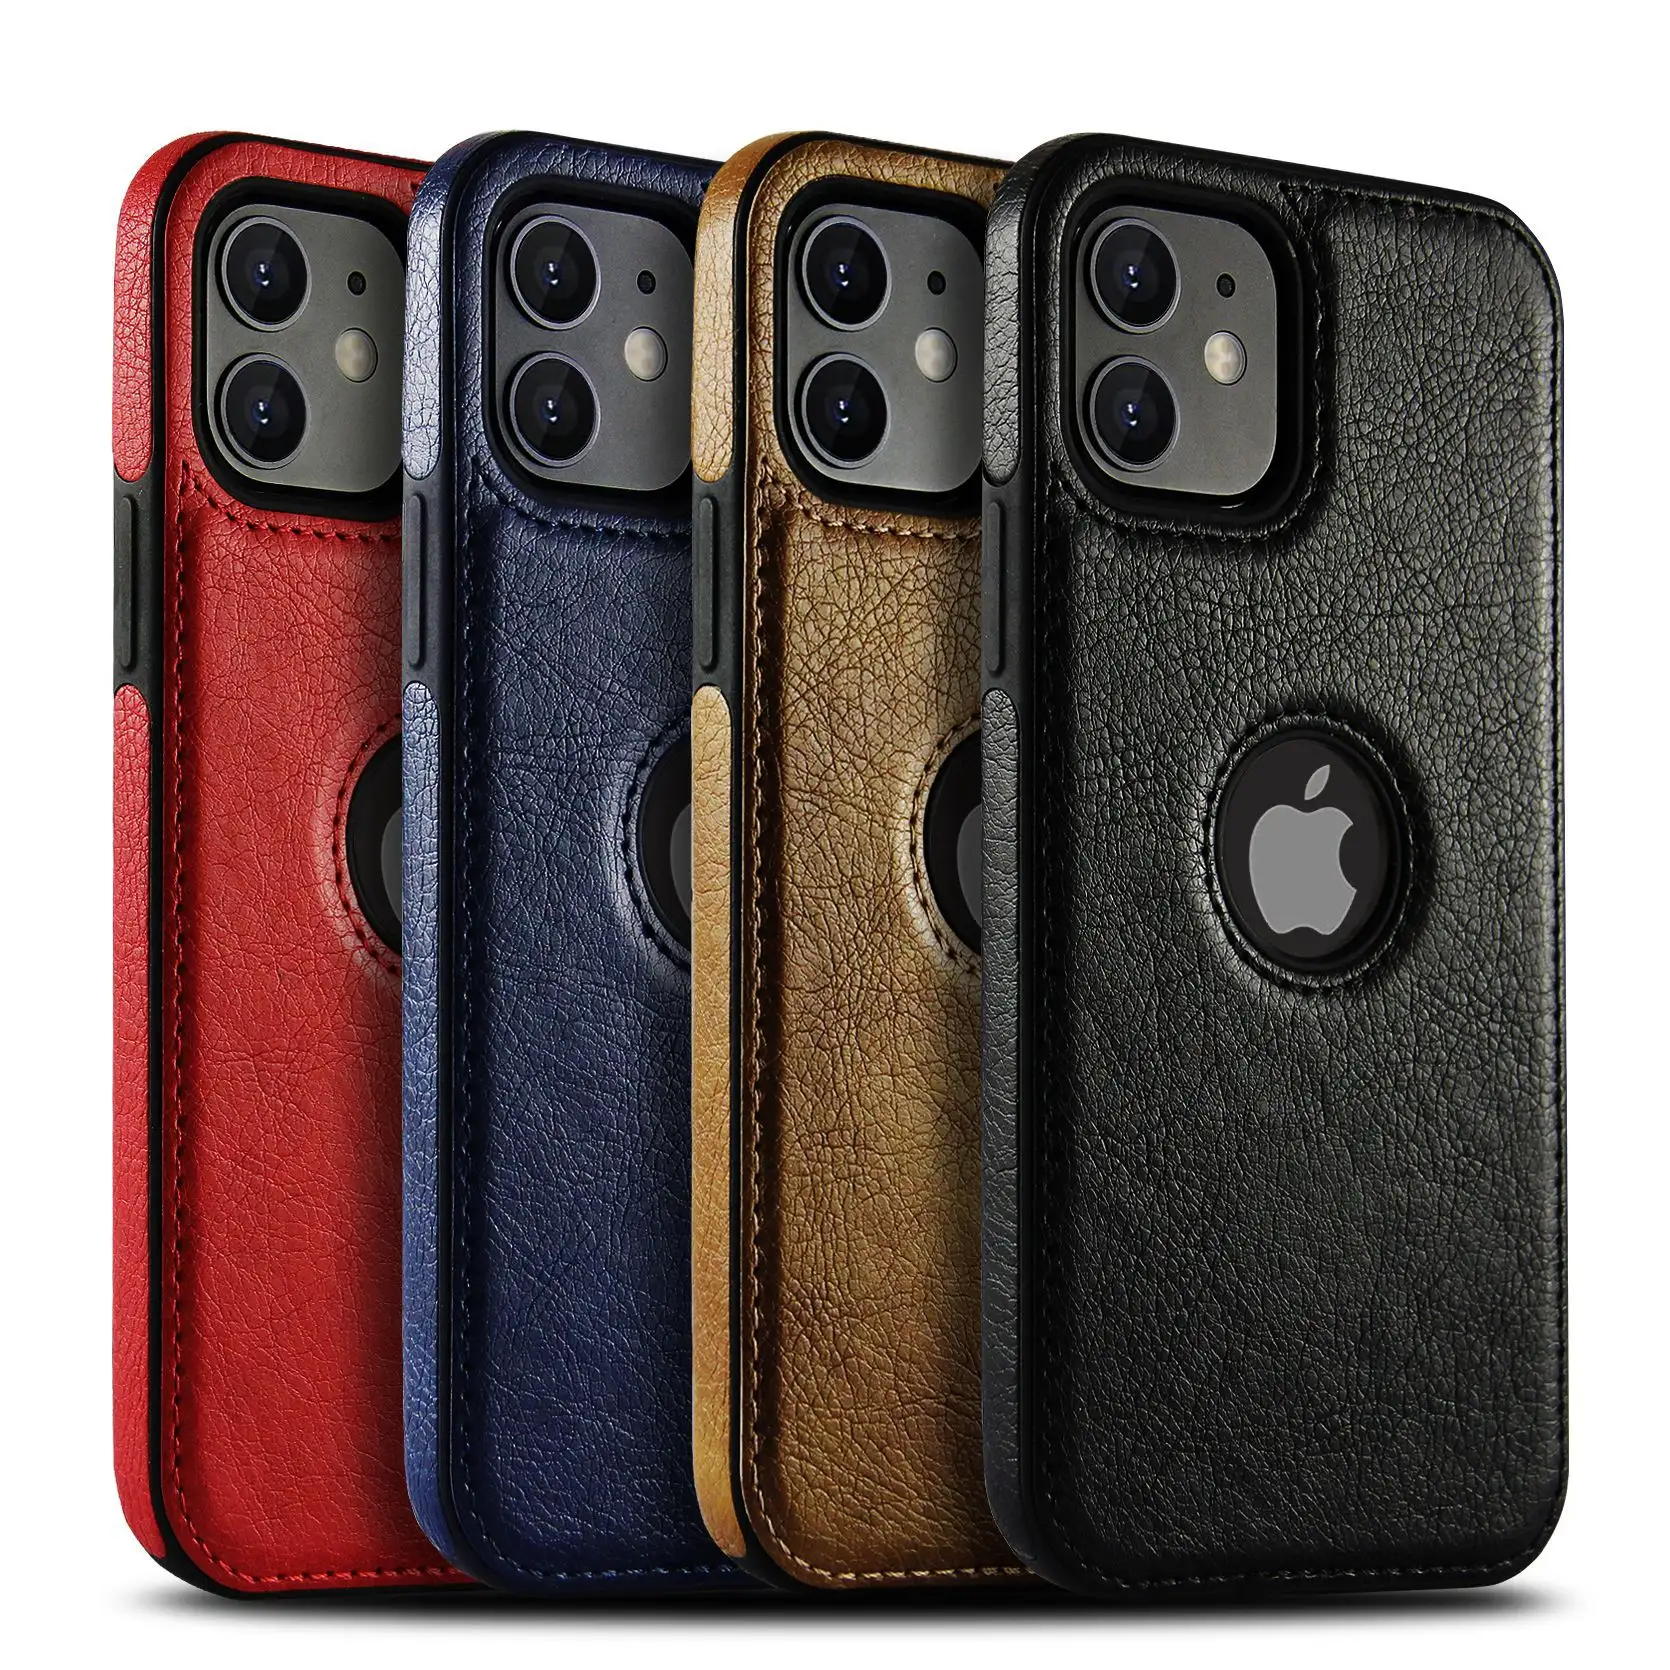 Exposed logo Business Leather Phone Case For iPhone 13 14 pro max PU protective cover For iPhone 11/12 pro max/xs max/7/8plus